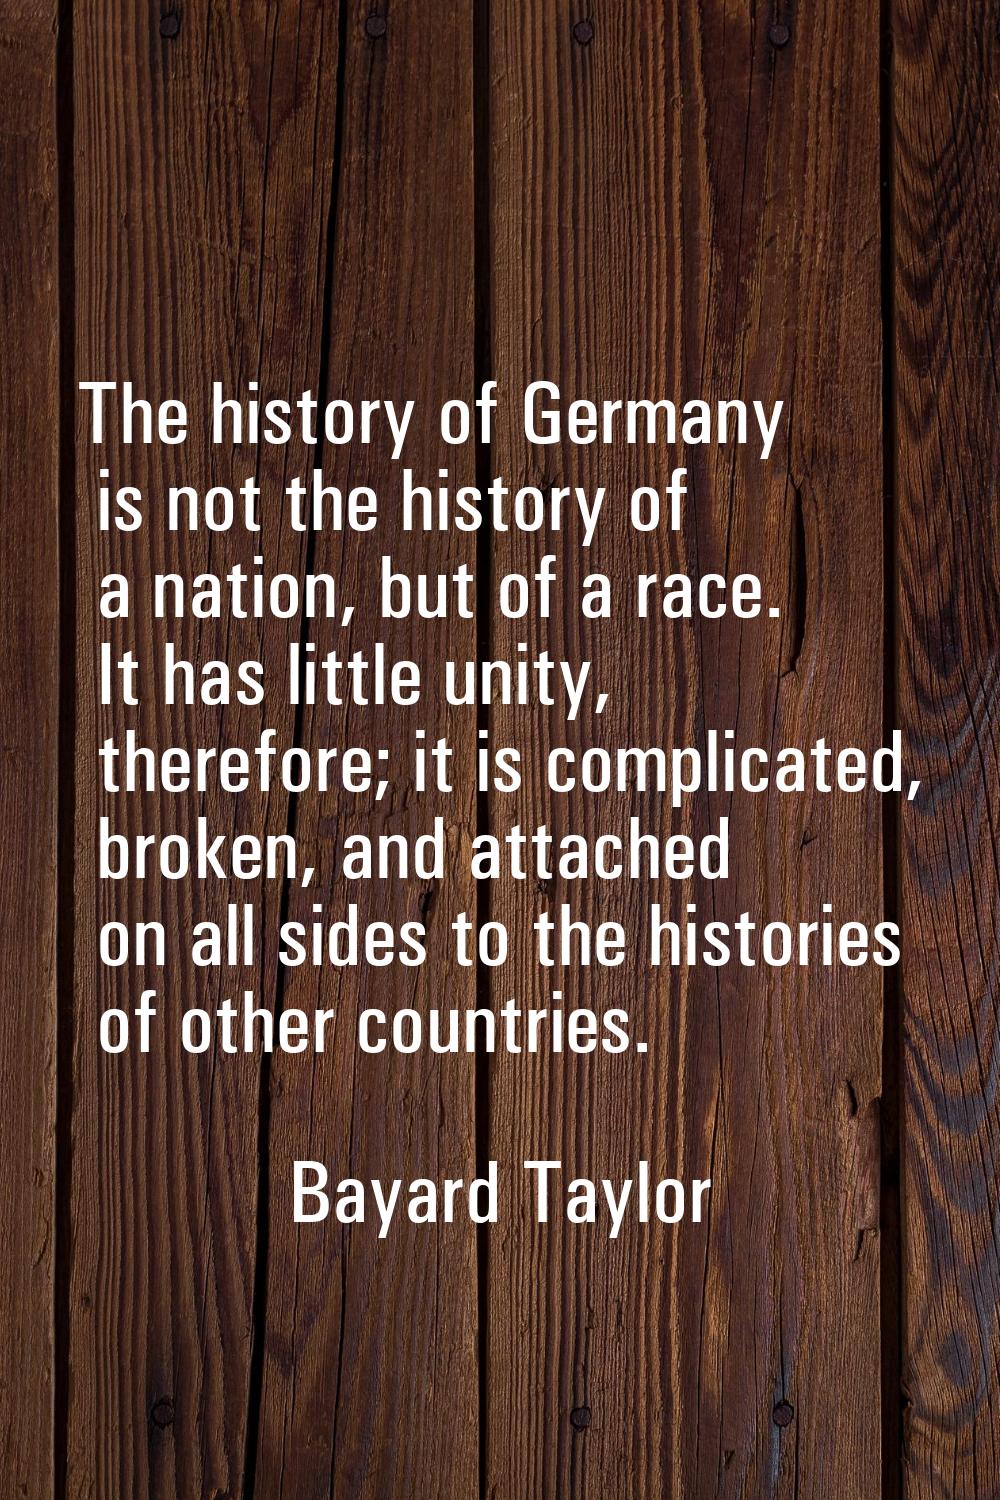 The history of Germany is not the history of a nation, but of a race. It has little unity, therefor